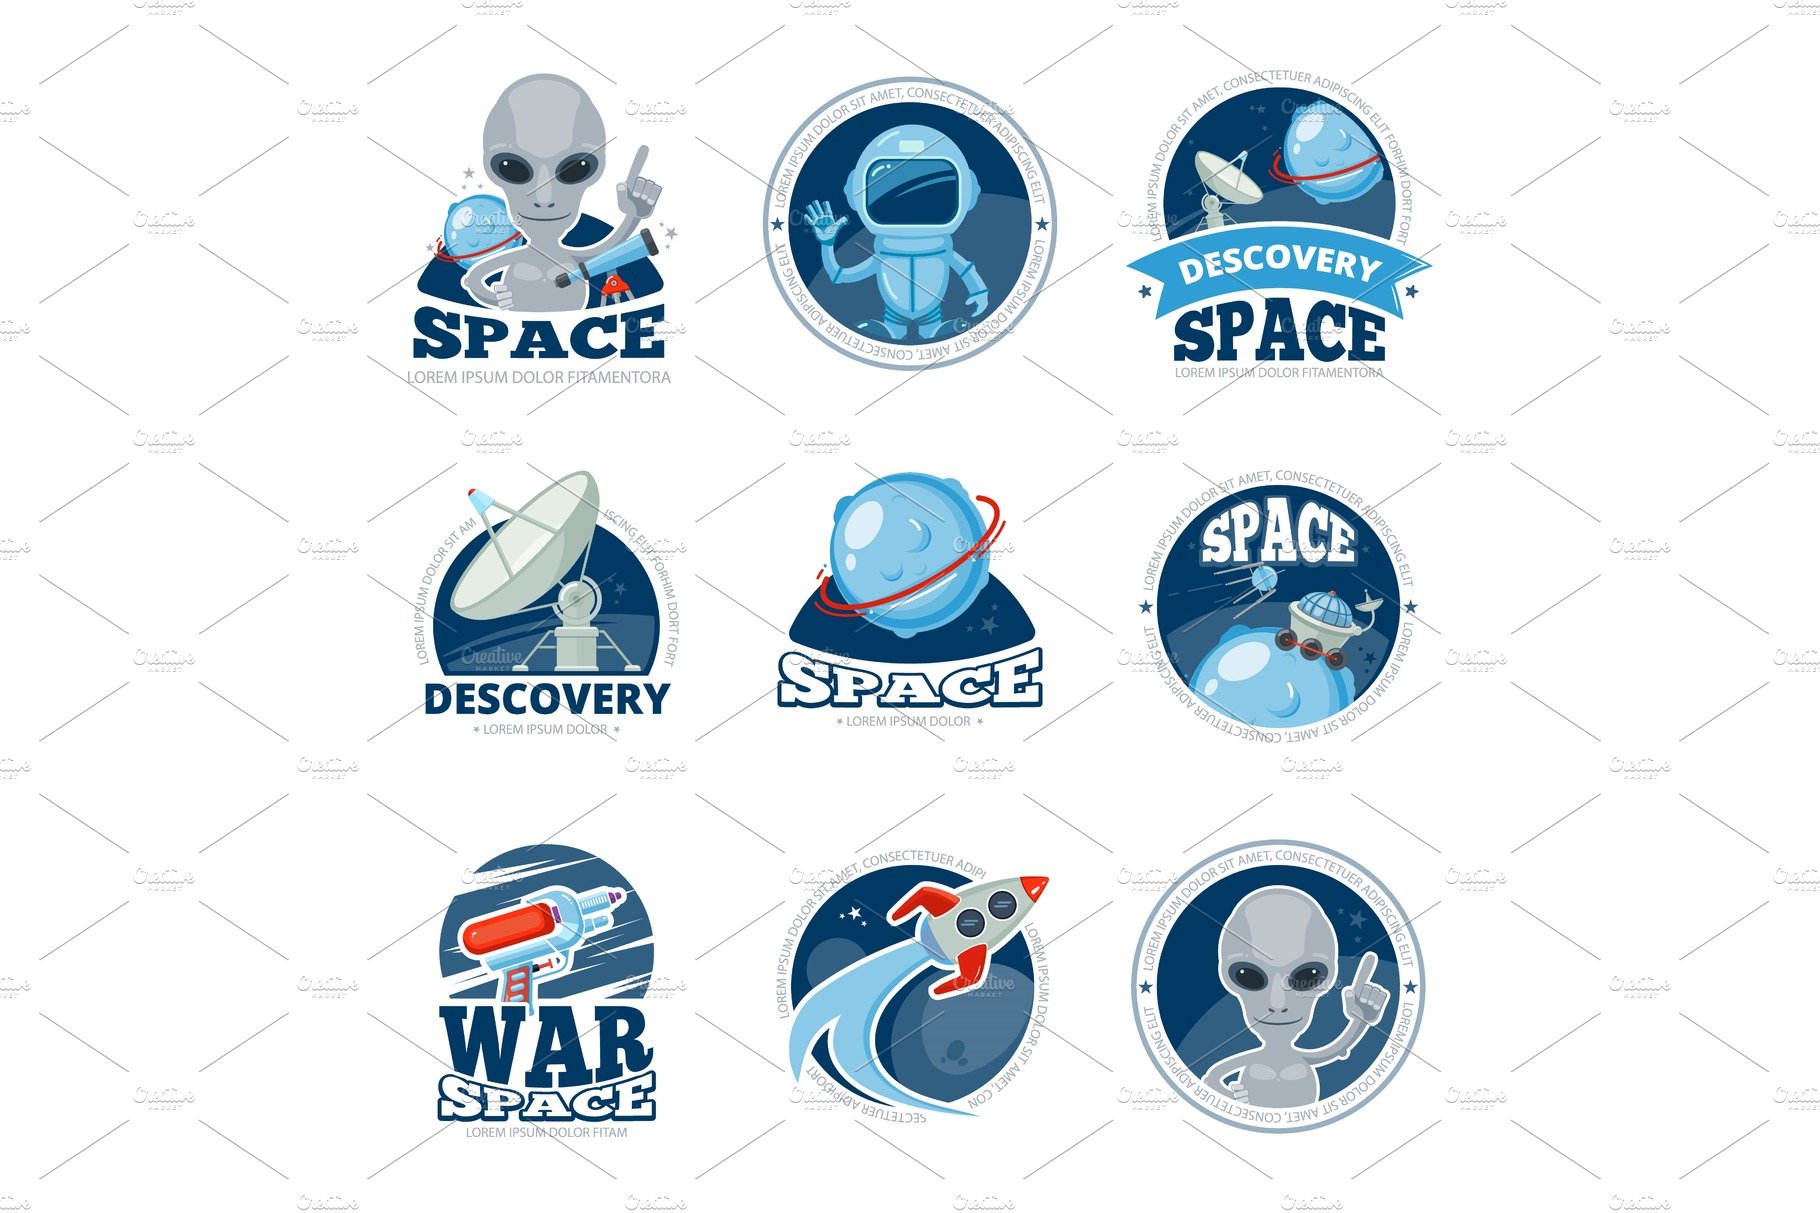 Space labels collection. Badges cover image.